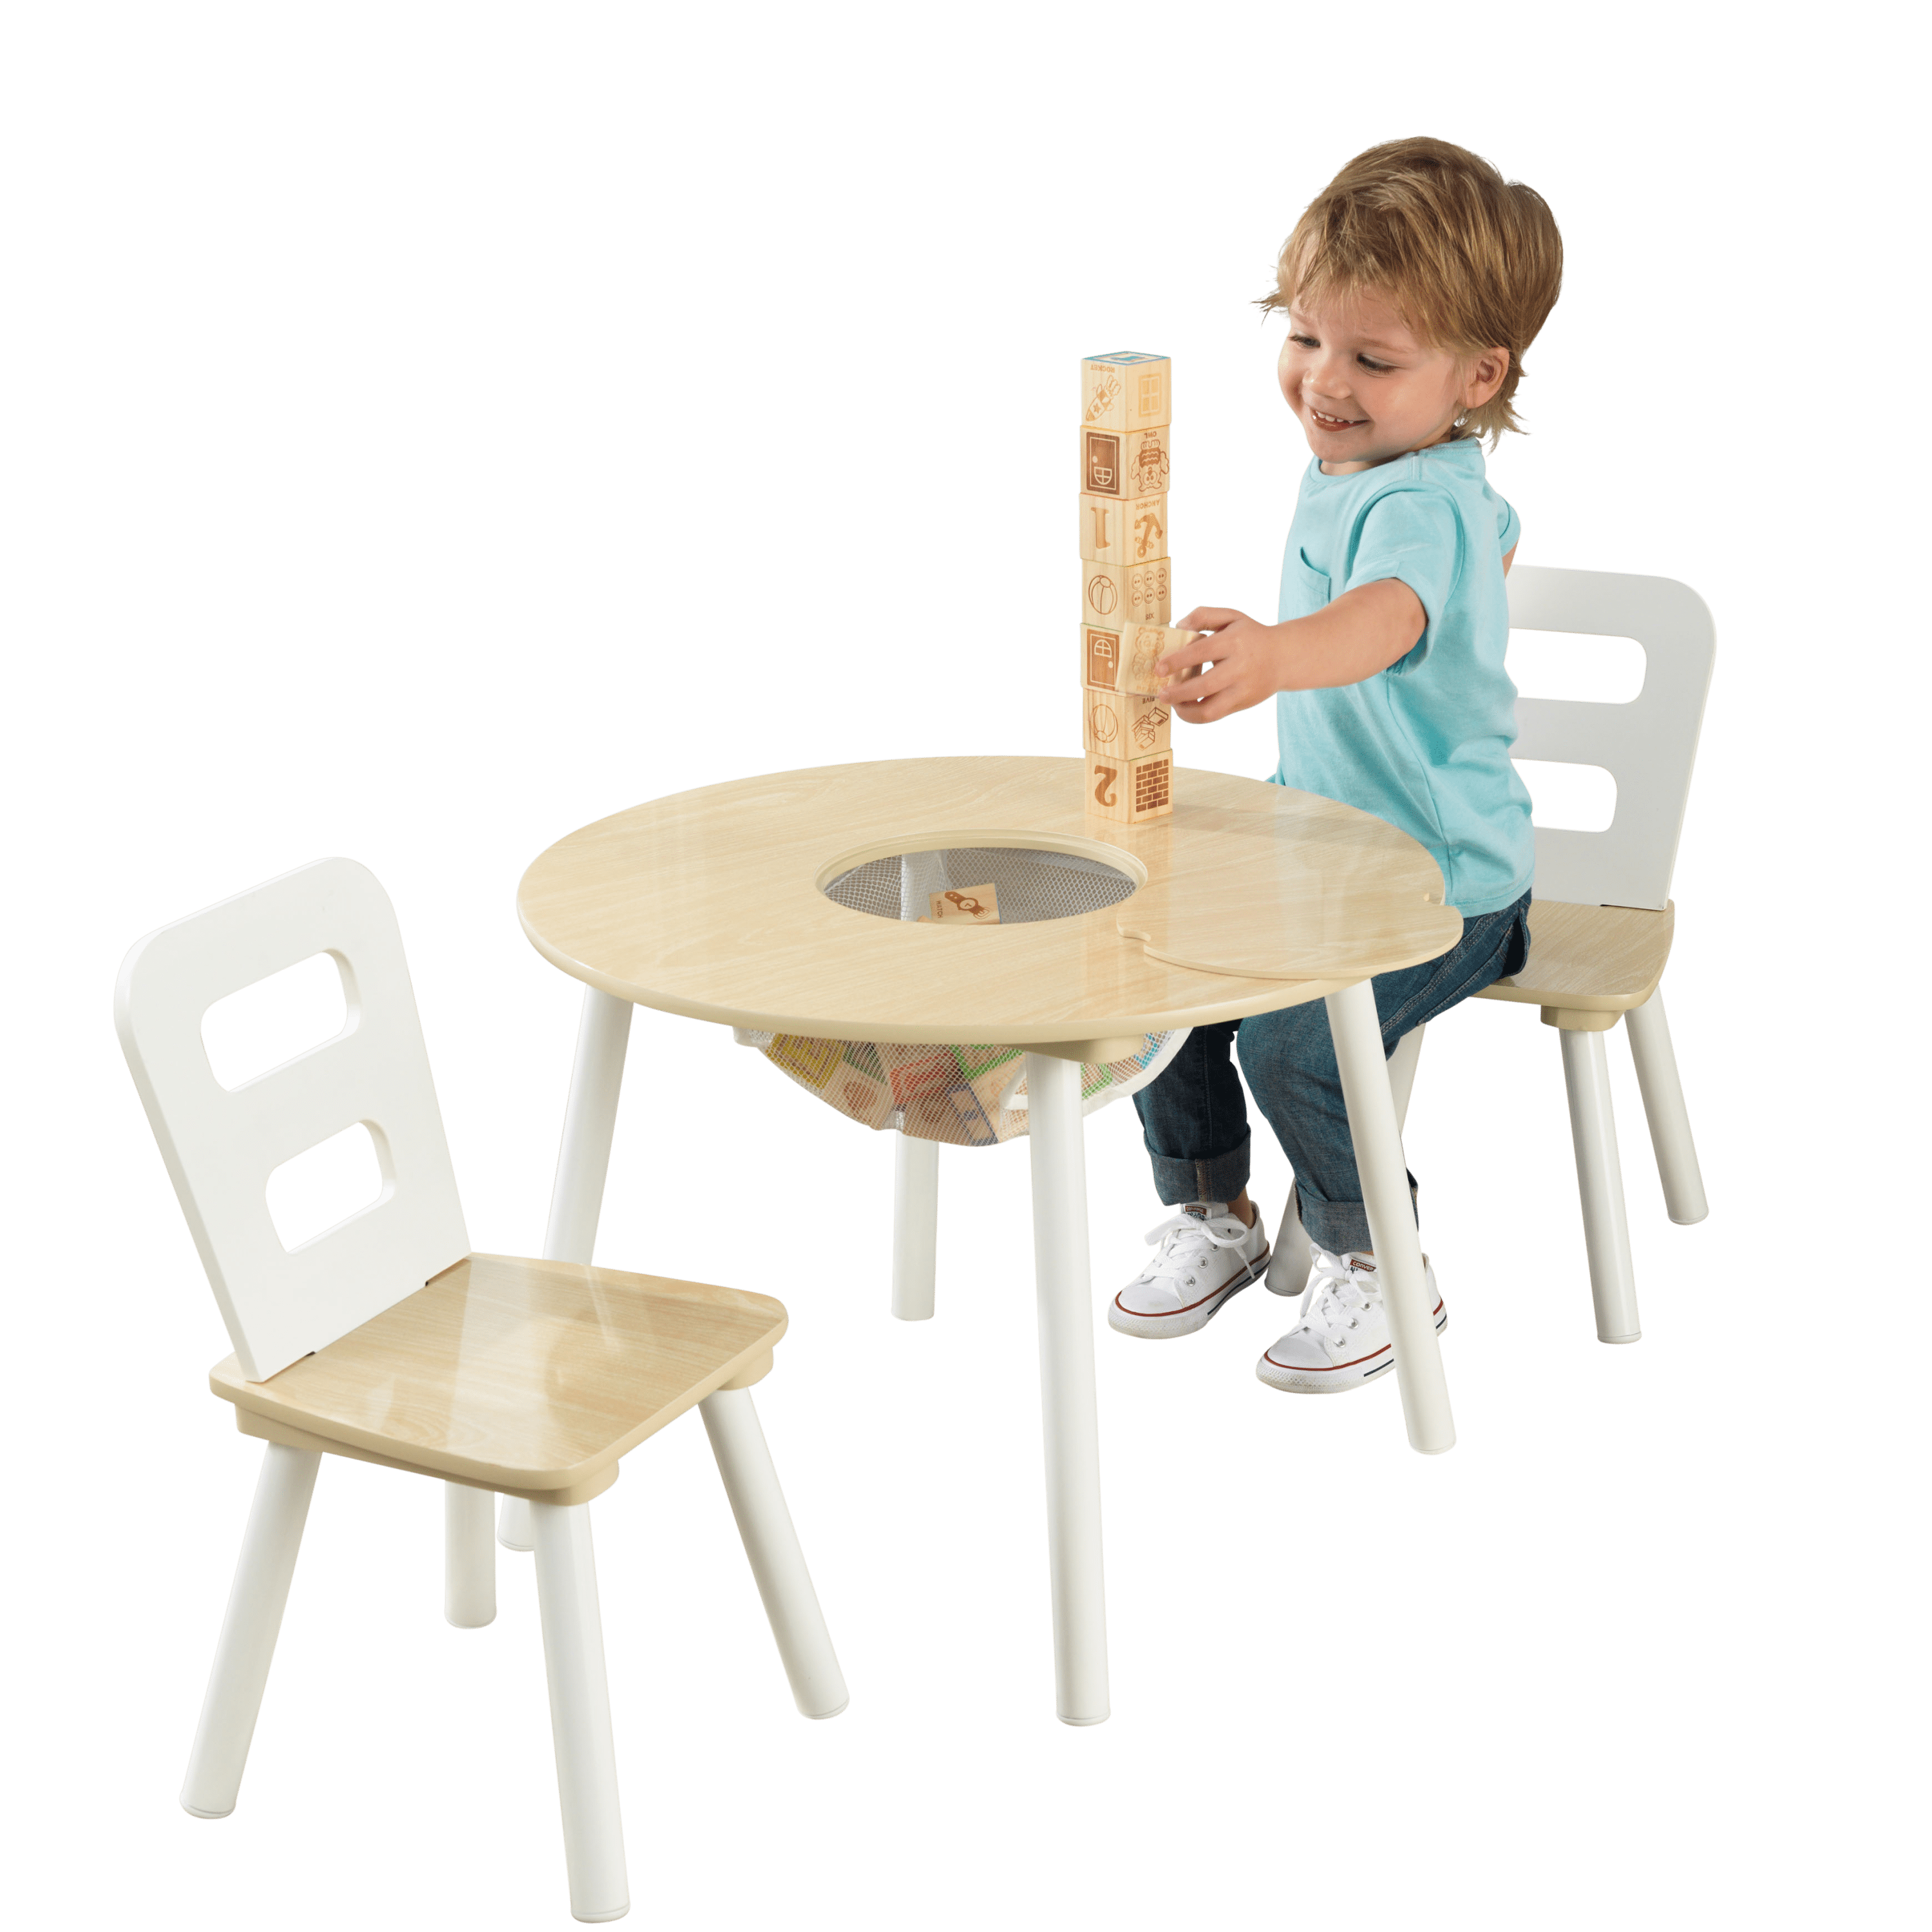 Kidkraft Wooden Kids Round Storage, Toddler Wooden Table And Chairs With Storage